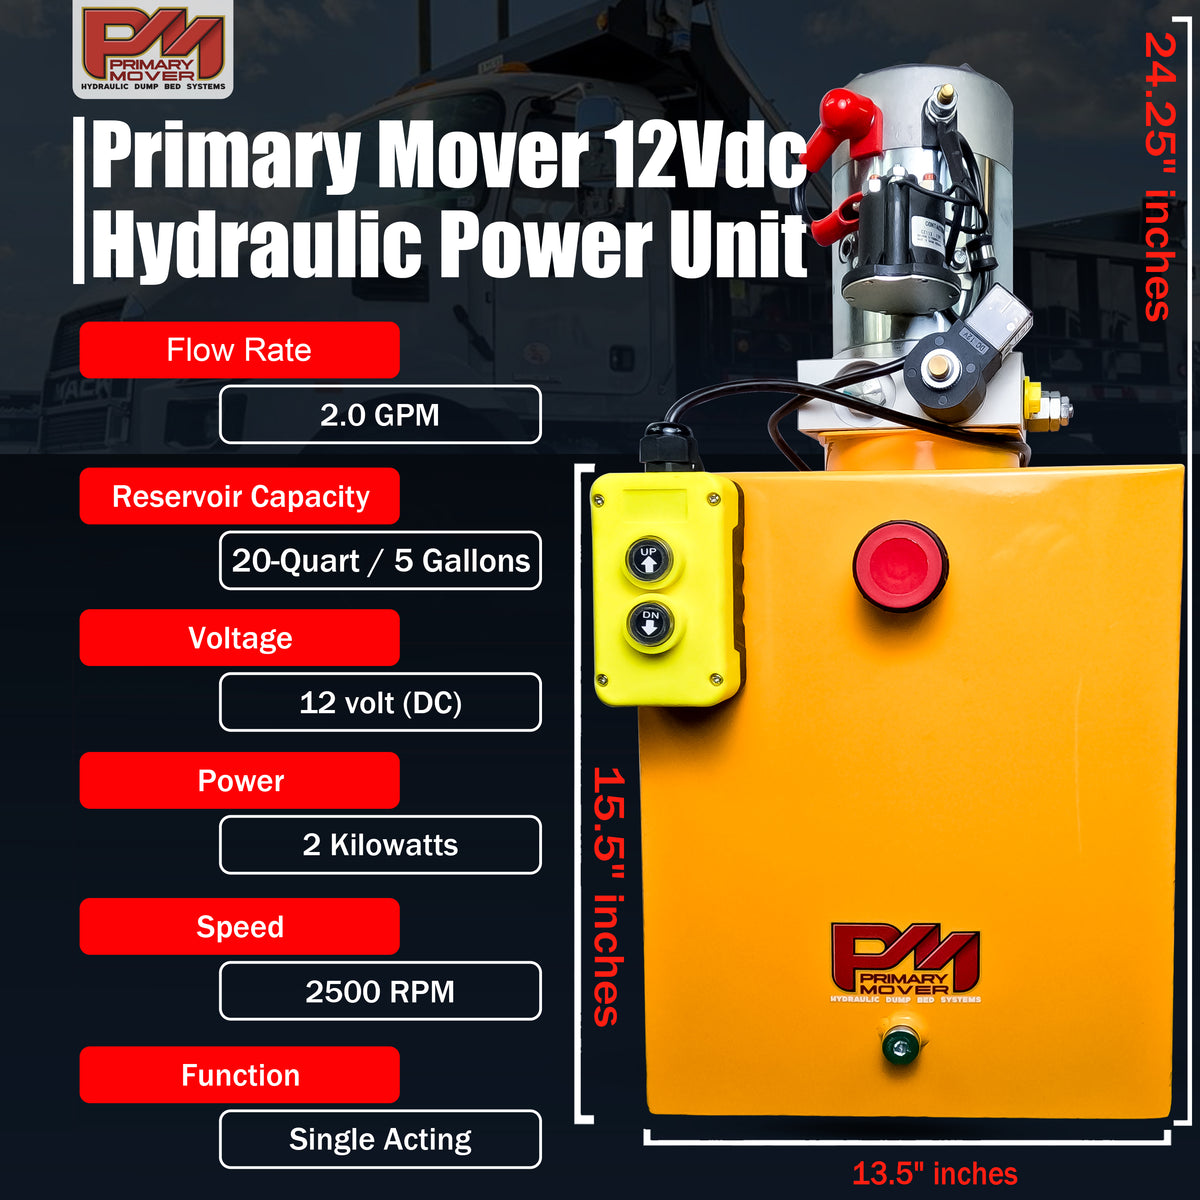 Primary Mover 12V Single-Acting Hydraulic Pump - Steel Reservoir for dump bed systems. High flow, 3200 PSI relief setting, 2.5 GPM, 4 Quart Reservoir, handheld pendant.